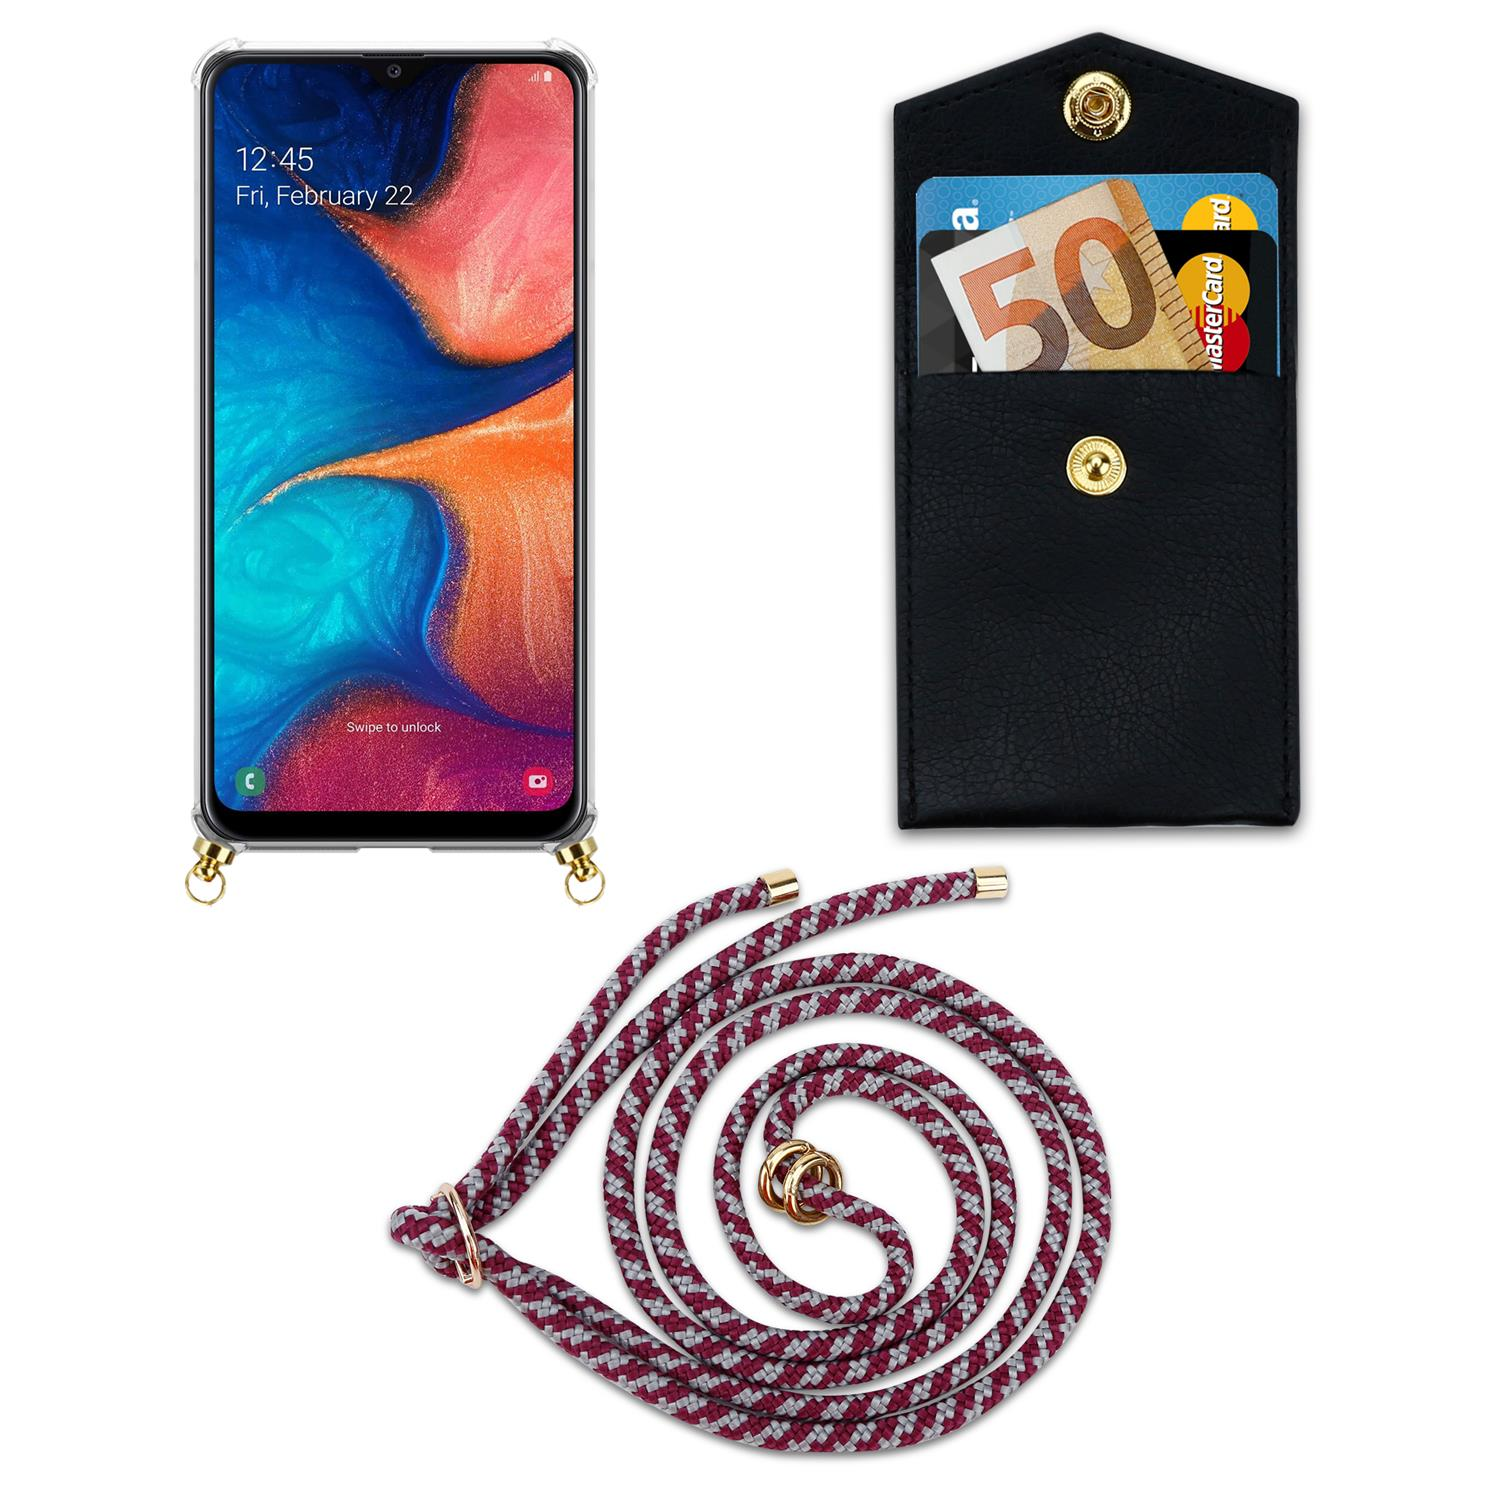 Hülle, Ringen, Band Gold abnehmbarer ROT Samsung, A20 A30 Kette / Kordel Galaxy mit und M10s, Handy Backcover, / CADORABO WEIß